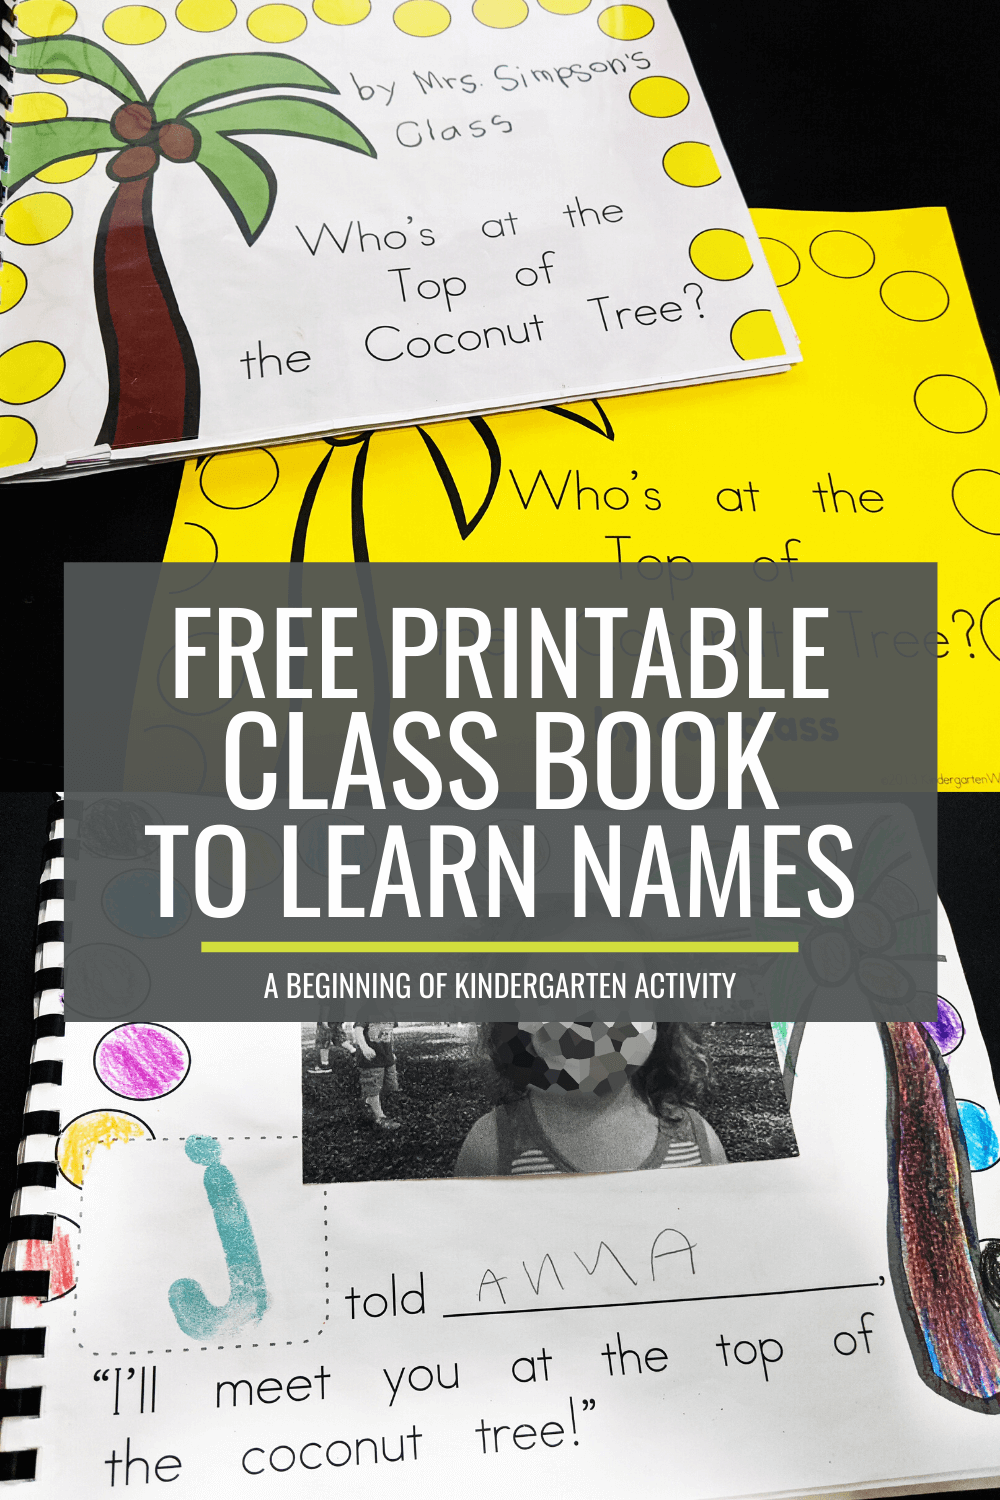 Free Class Book to Learn Names at the Beginning of Kindergarten